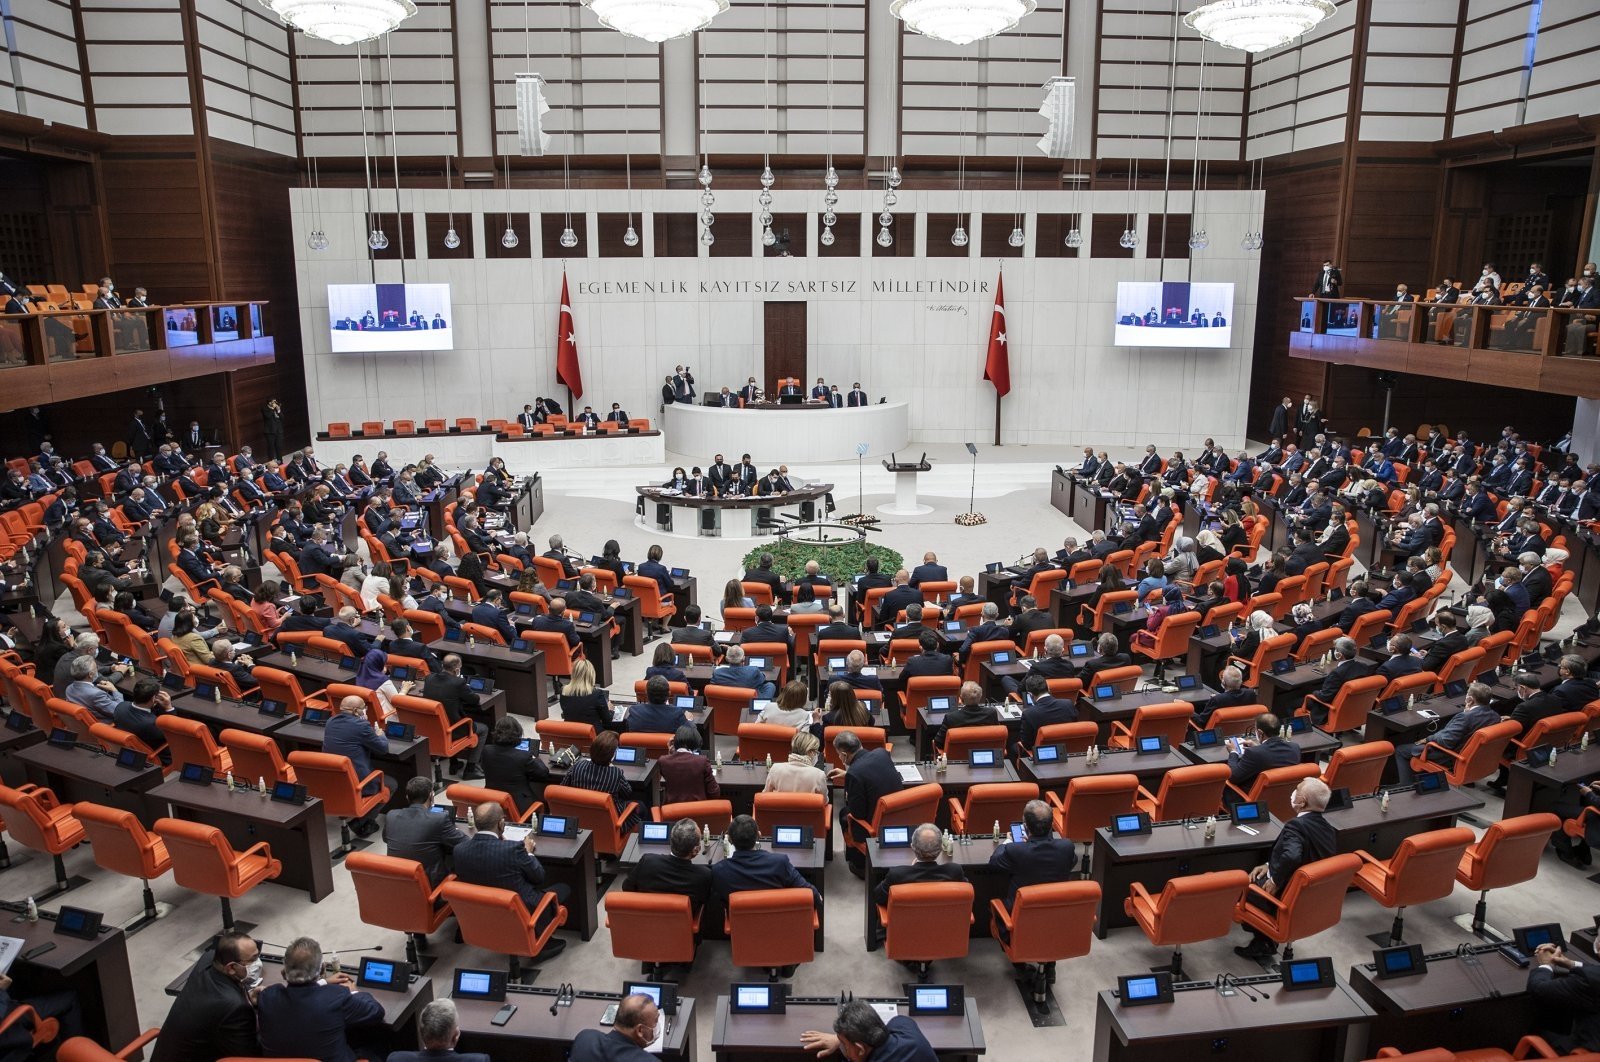 The Turkish Grand National Assembly (TBMM) convenes for the opening ceremony of the fifth legislative year of its 27th term, the capital Ankara, Turkey, Oct. 1, 2021. (AA Photo)